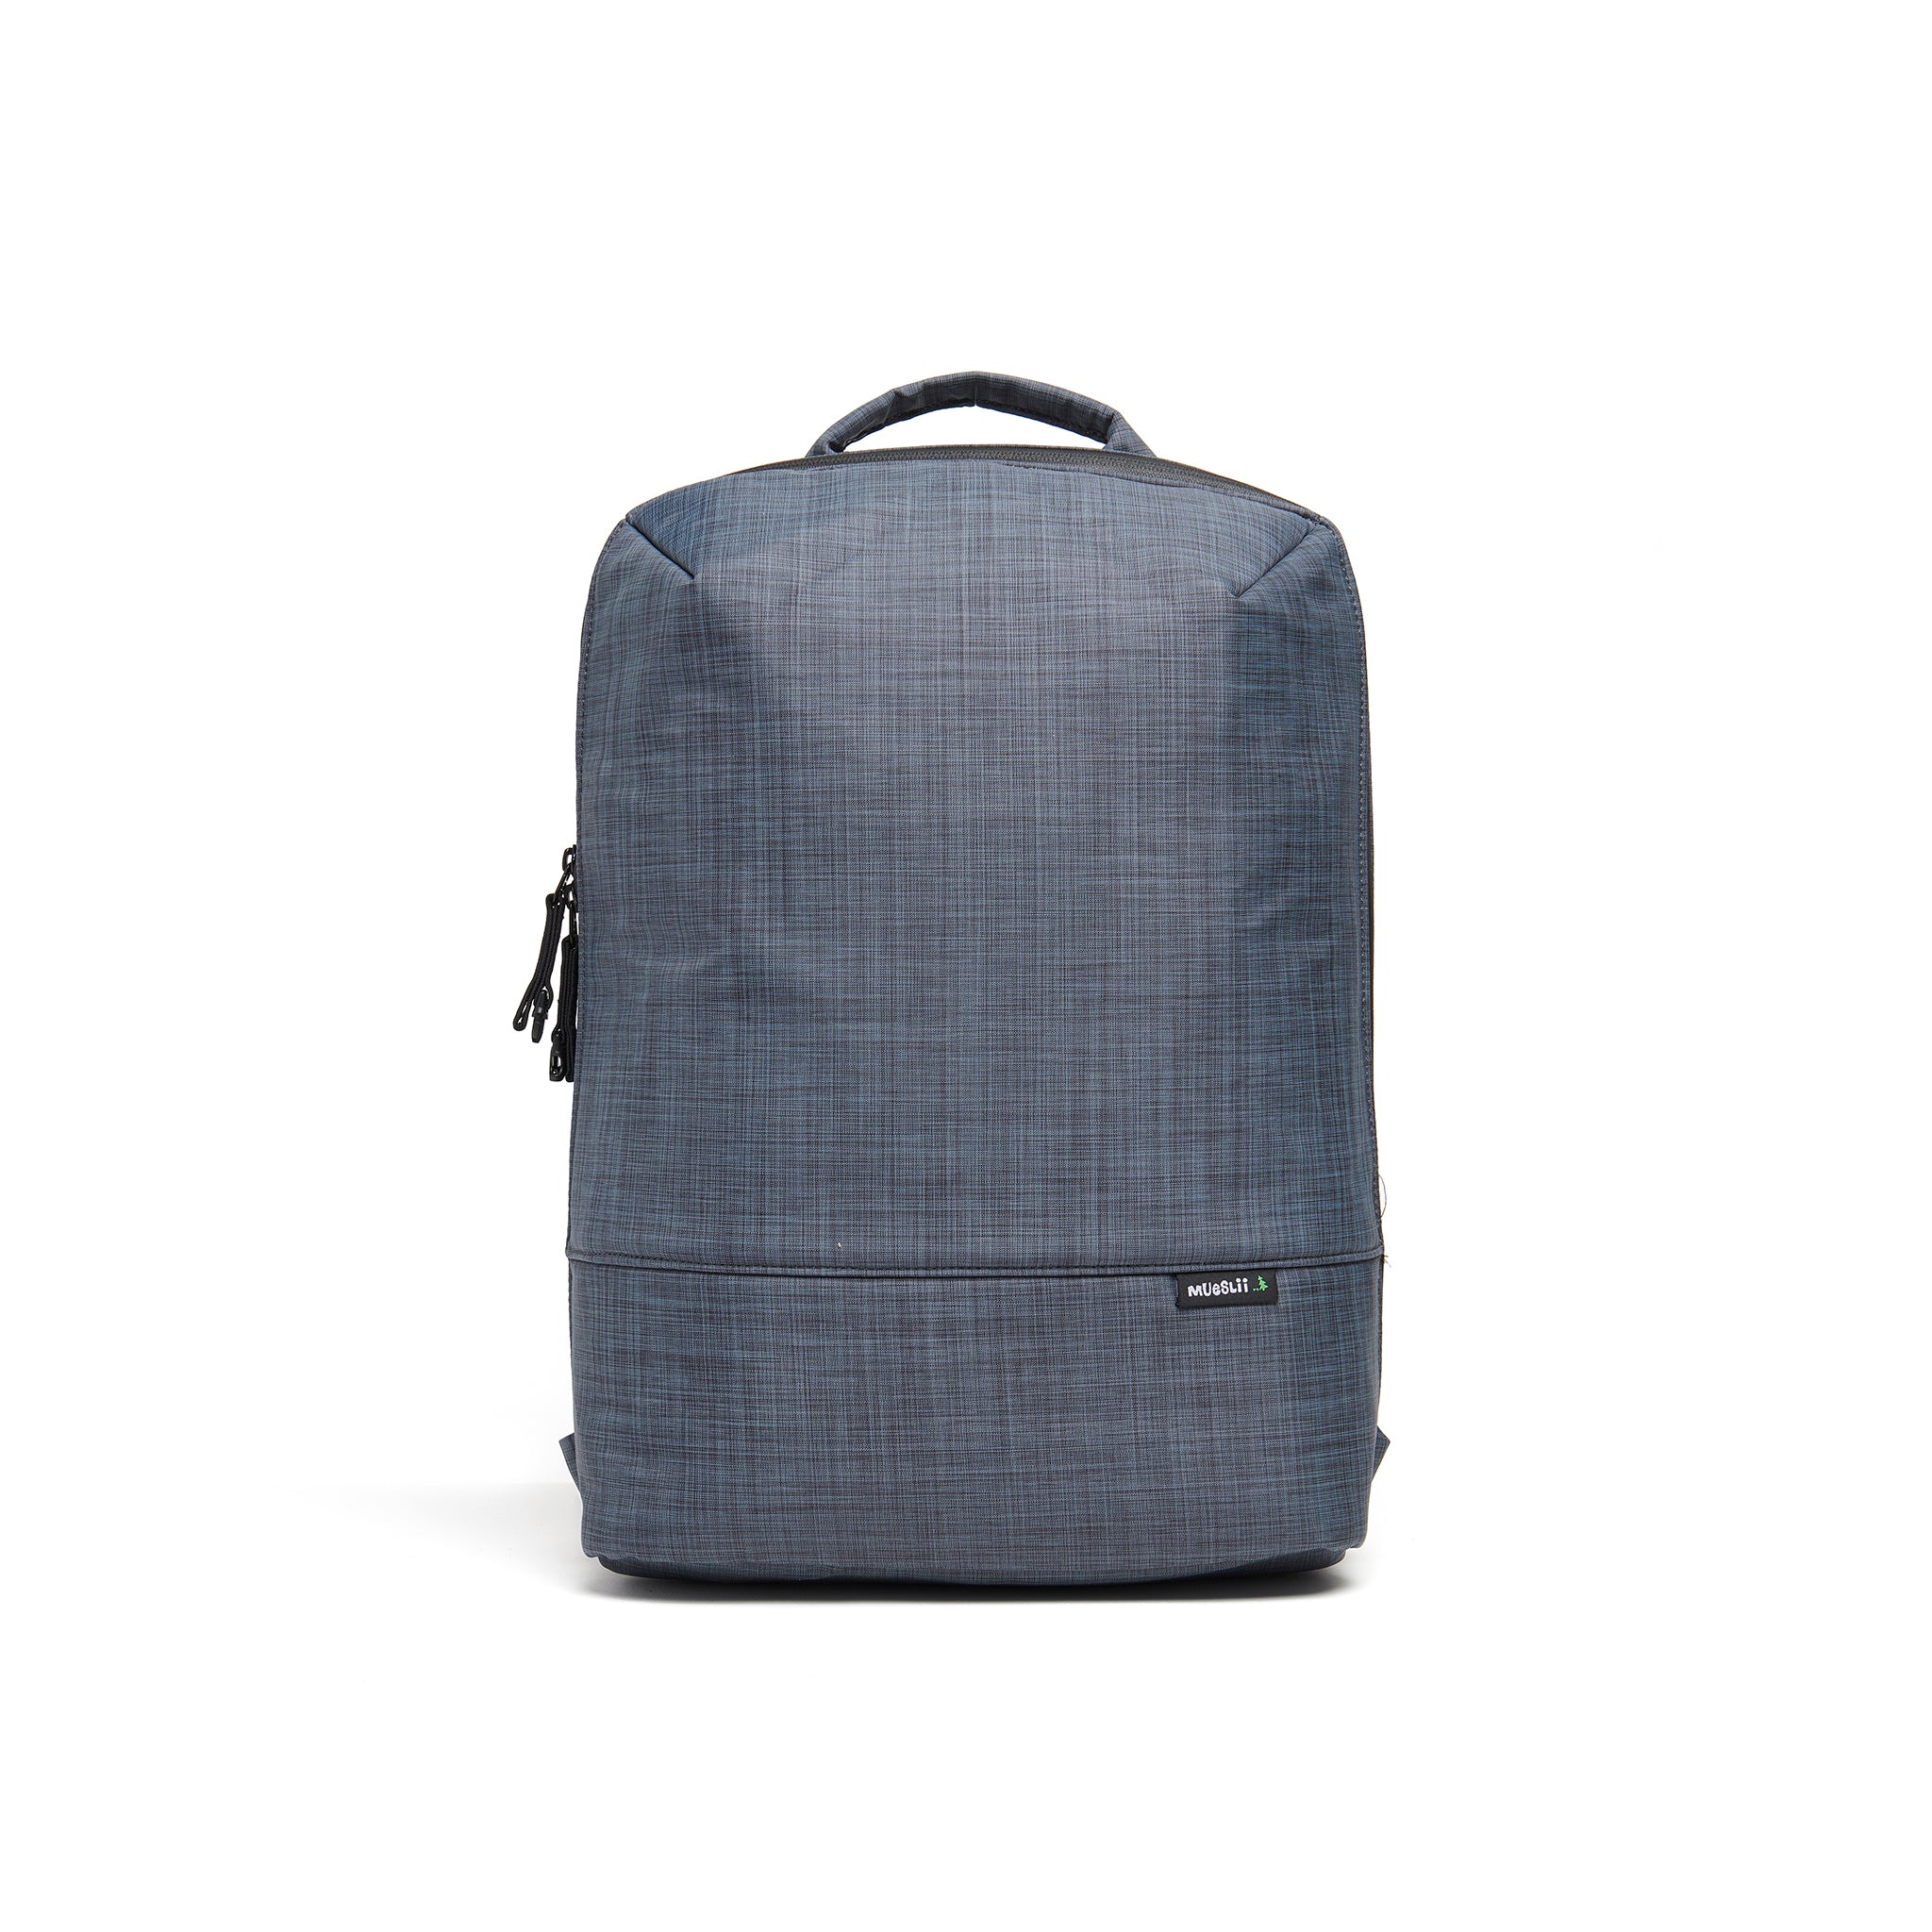 Mueslii daily backpack, made of  water resistant canvas nylon, with a laptop compartment, color slate grey, front view.